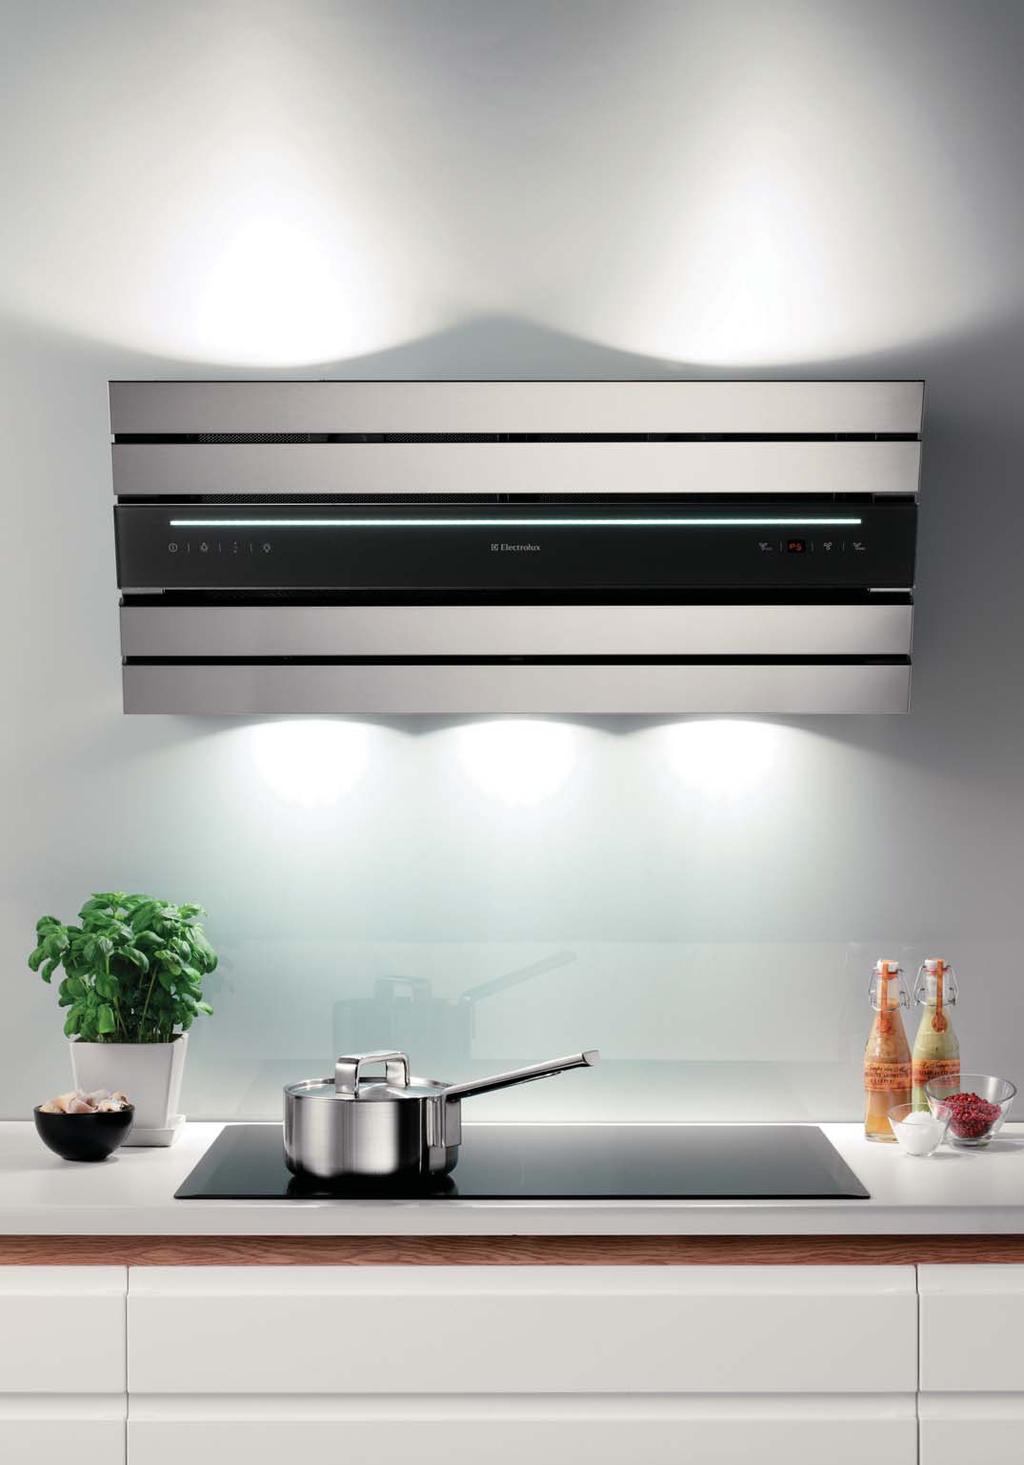 42 electrolux cooking electrolux cooking 43 A breath of fresh air! With more of us living, eating and entertaining in the kitchen, a good cooker hood has never been more important.